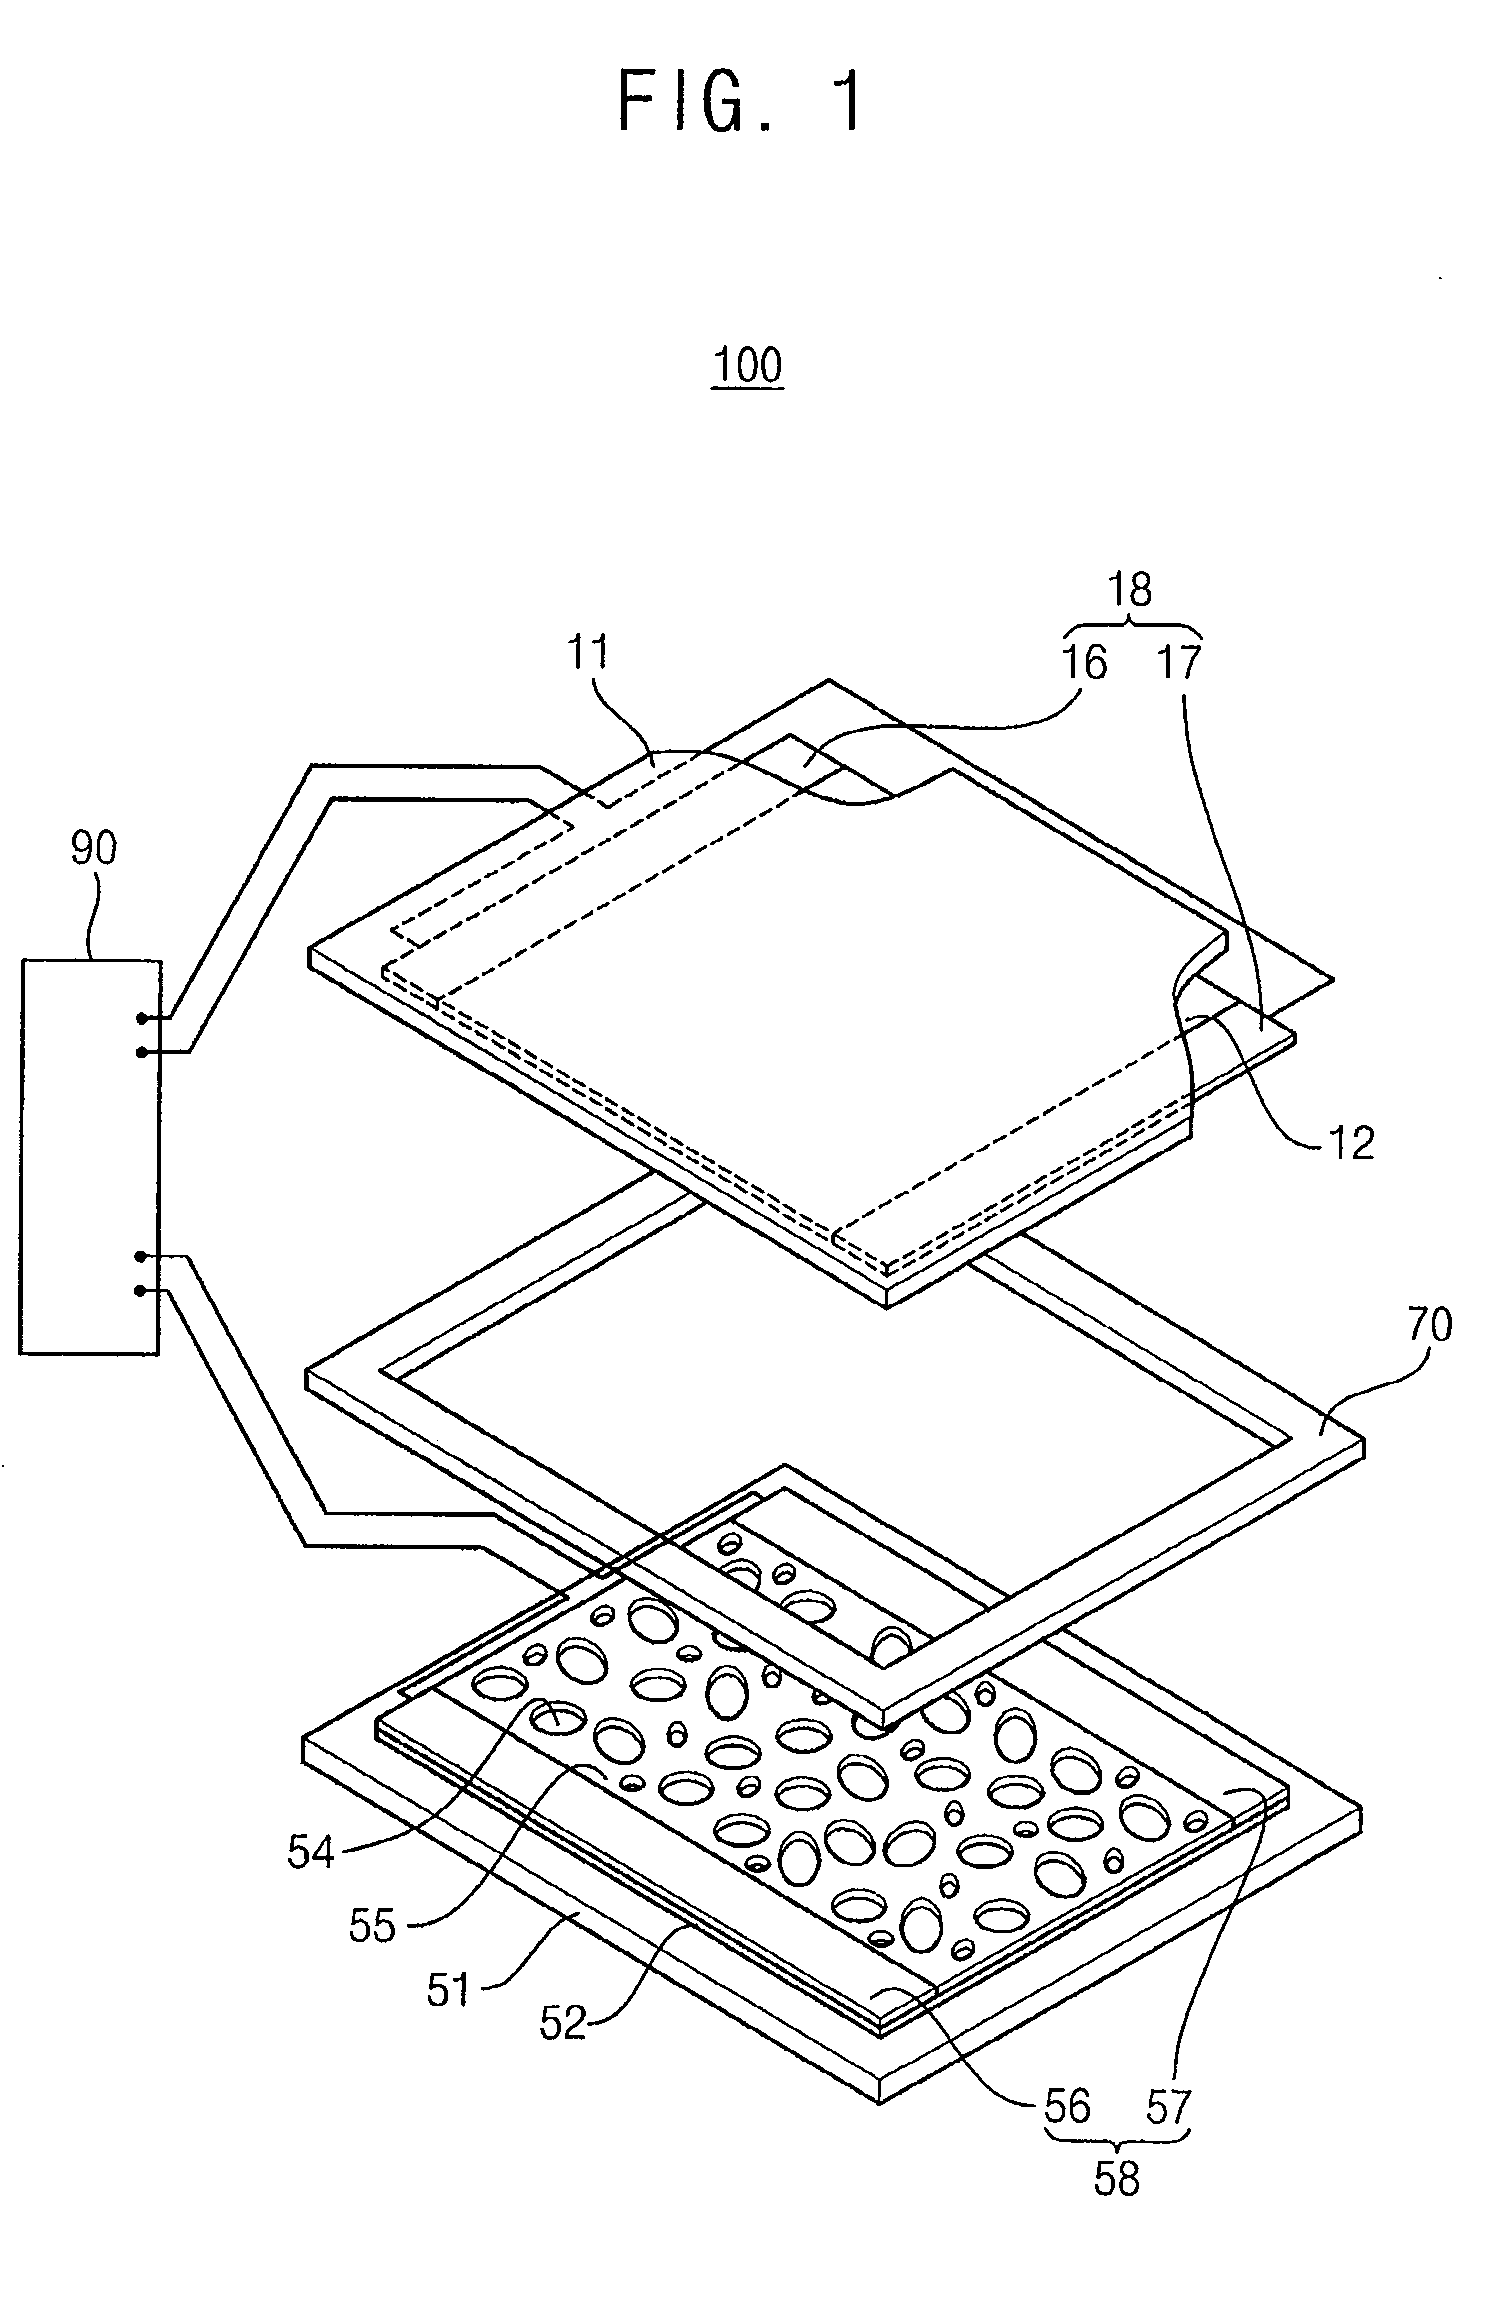 Touch screen display having touch panel, and method of manufacture